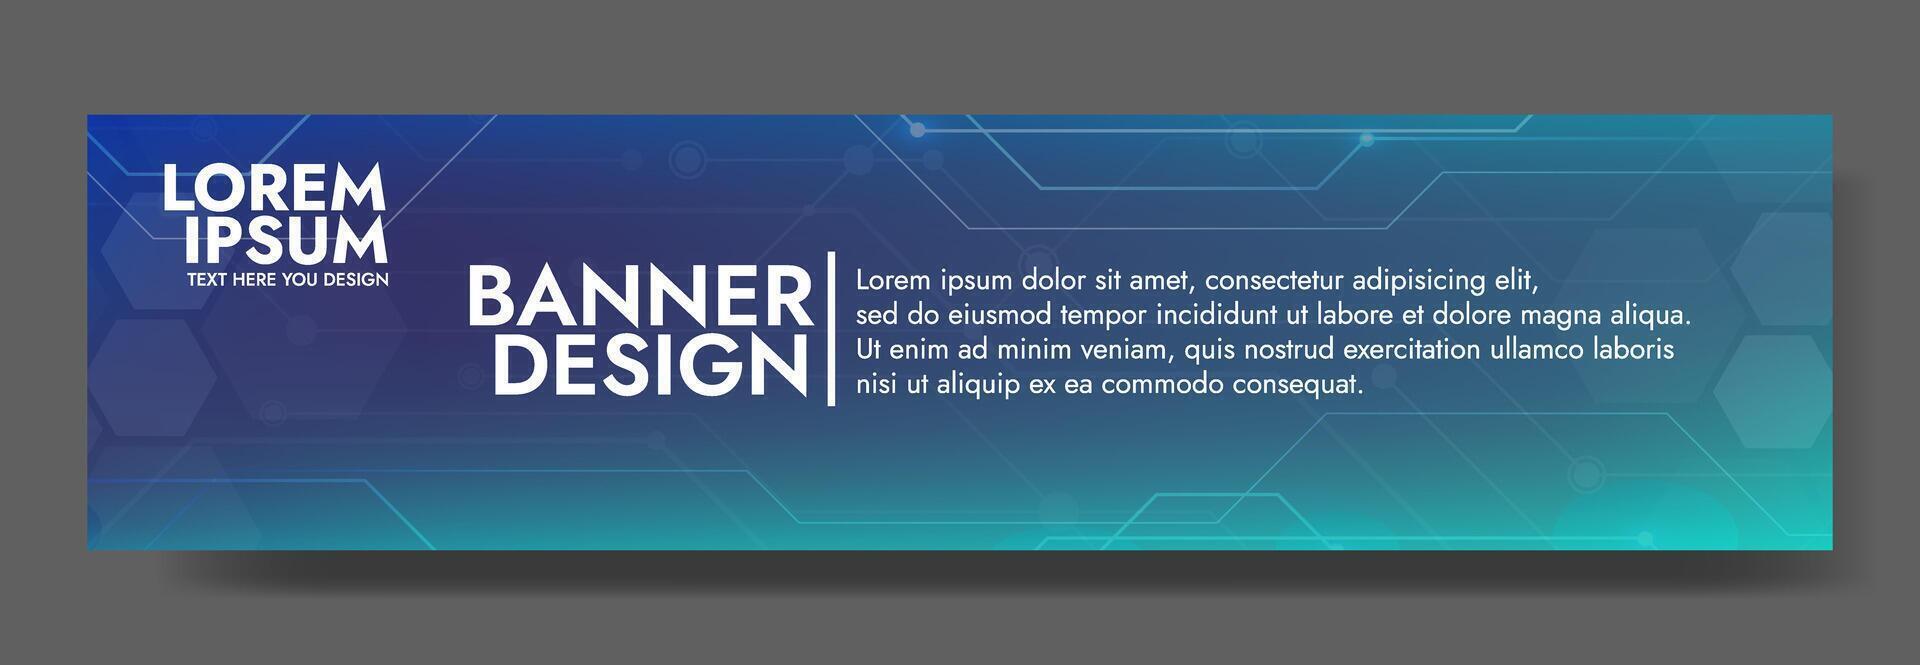 Gradient Digital technology banner. Futuristic banner for various design projects such as websites, presentations, print materials, social media posts vector